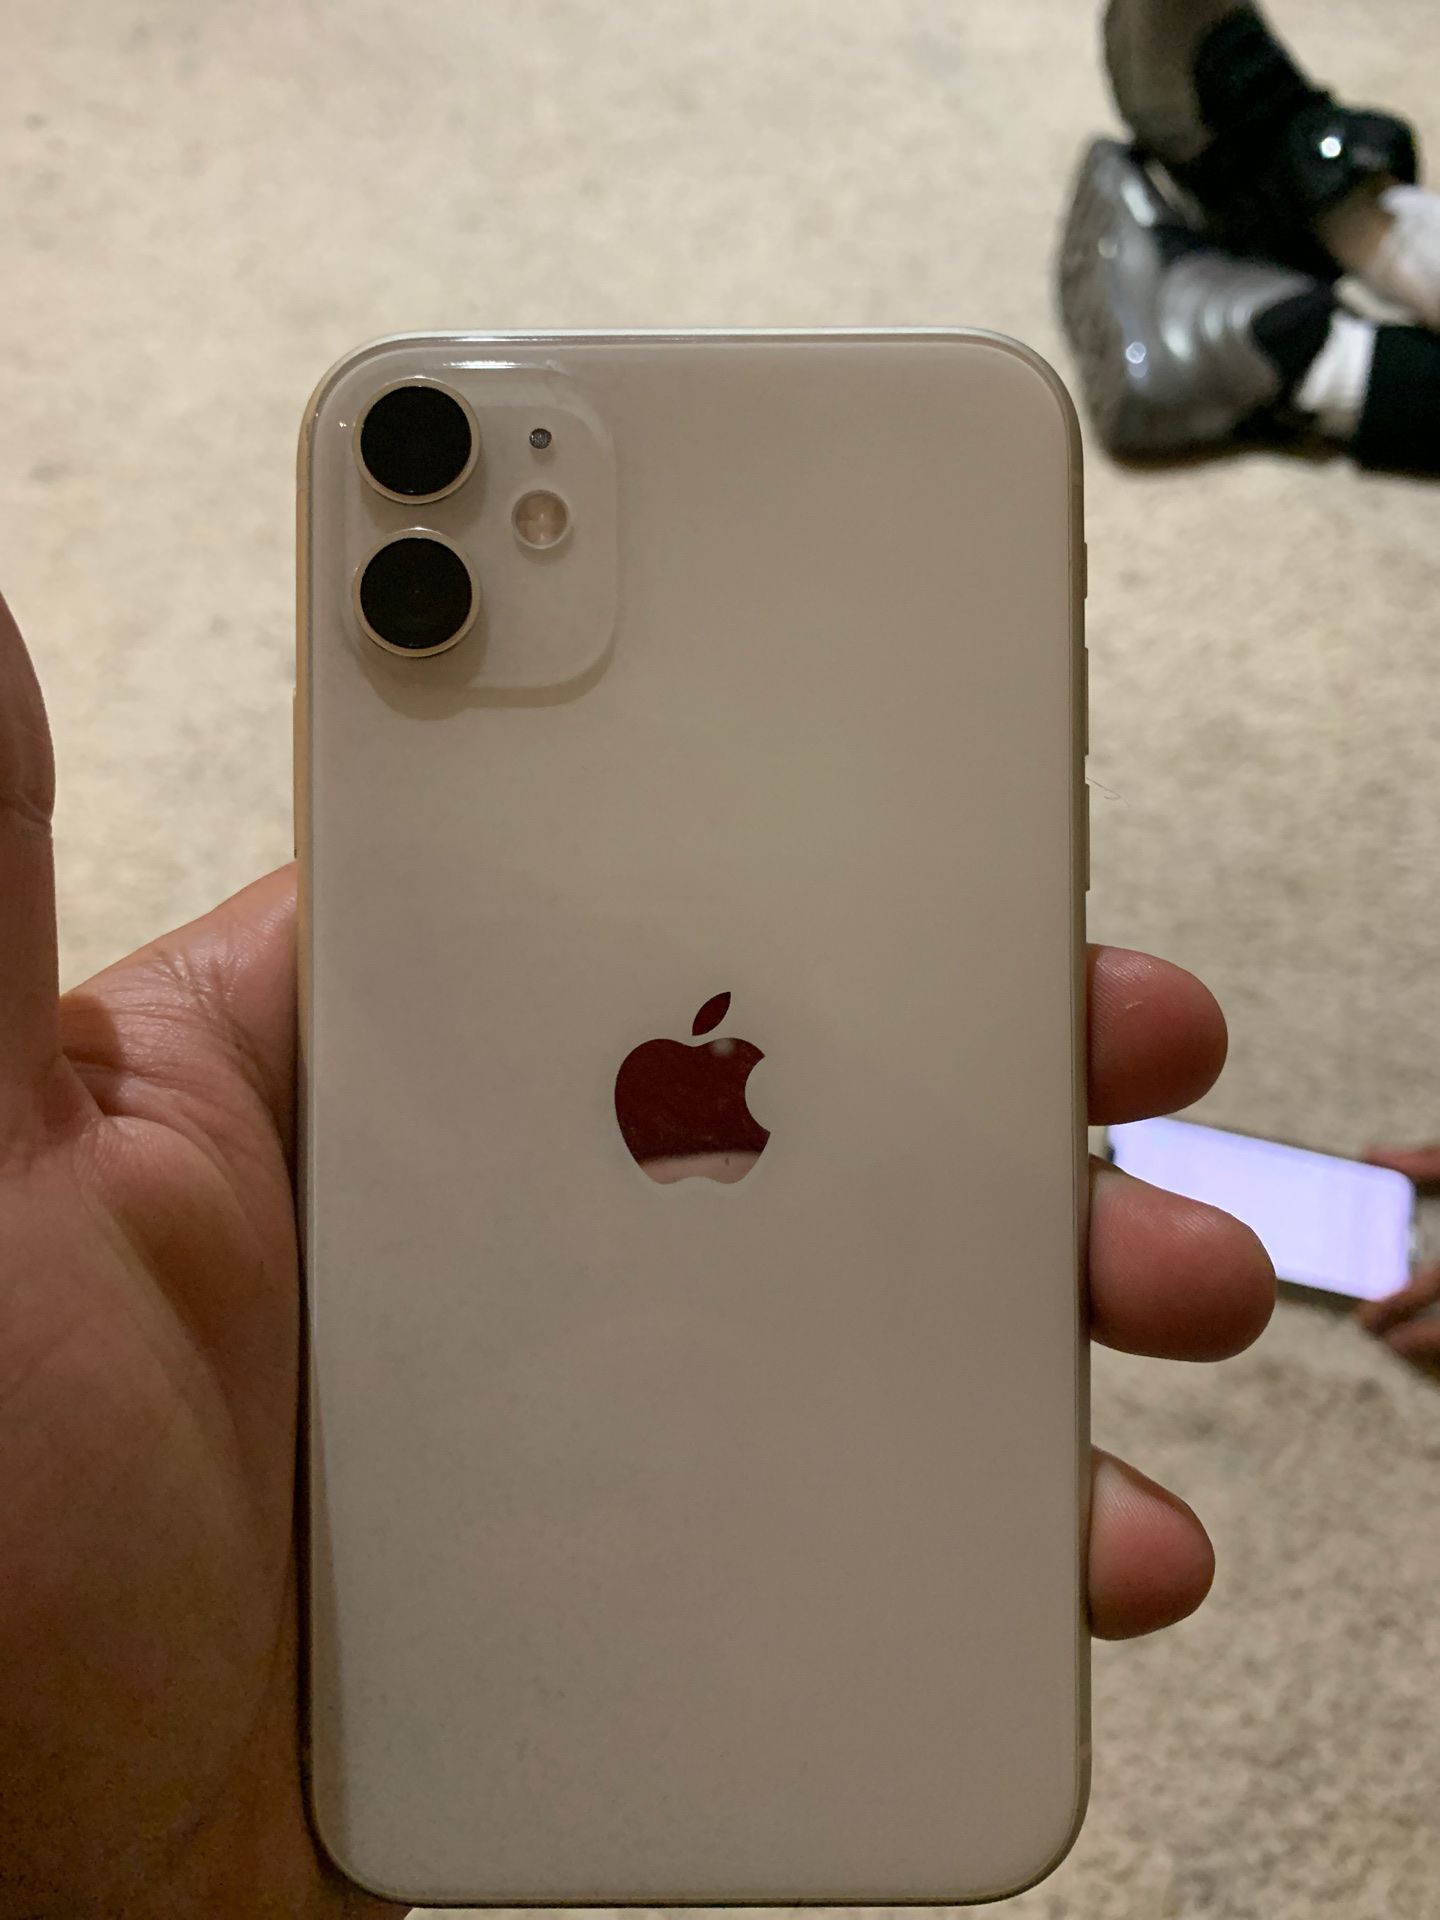 Iphone 11 128 gb unlocked for any carrier